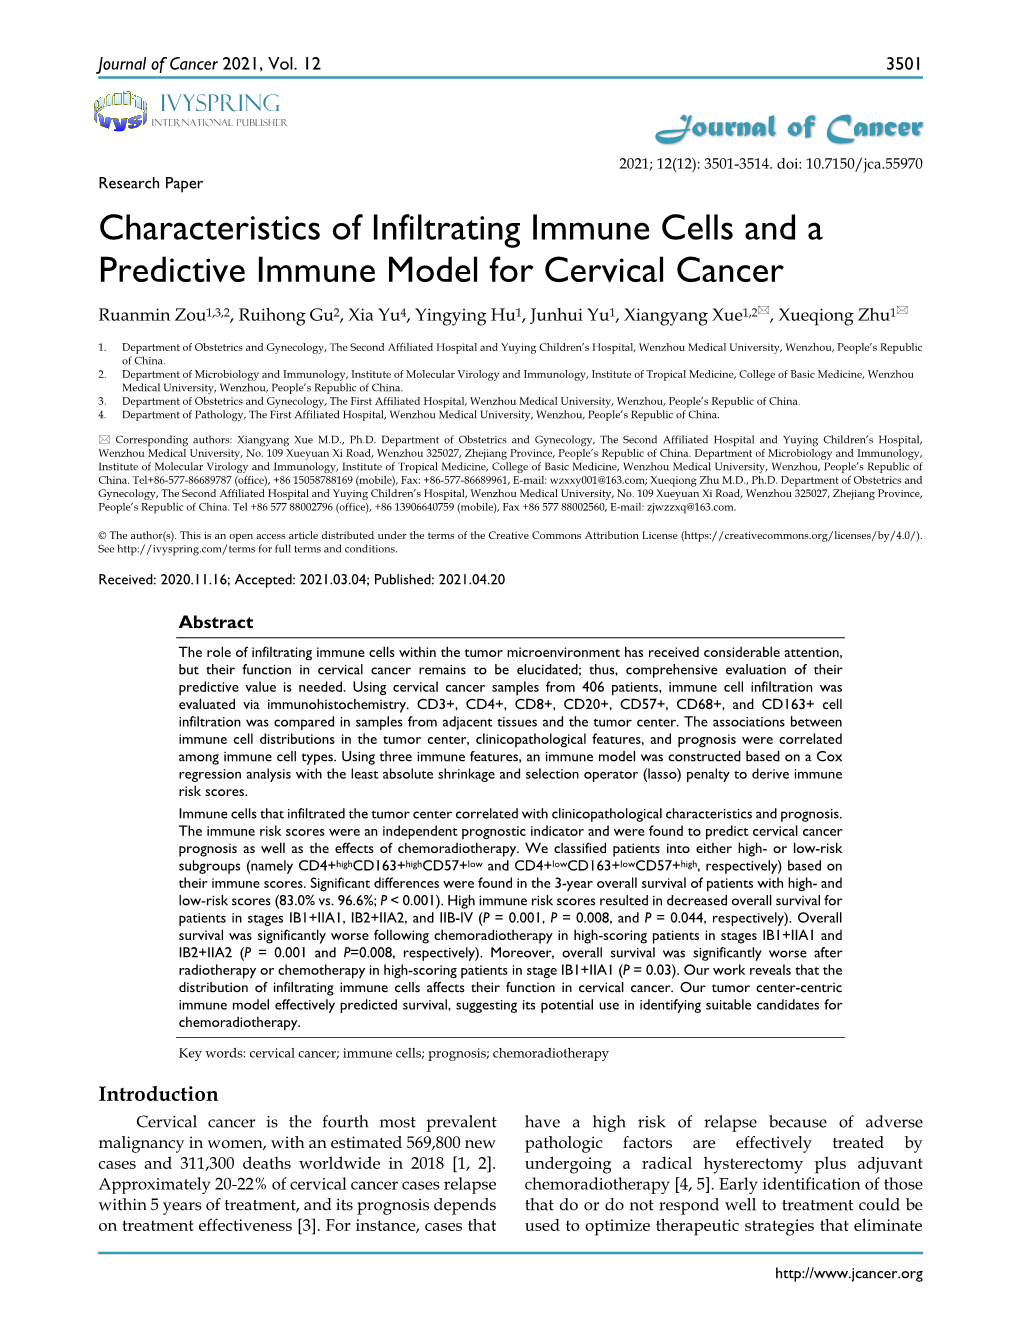 Characteristics of Infiltrating Immune Cells and a Predictive Immune